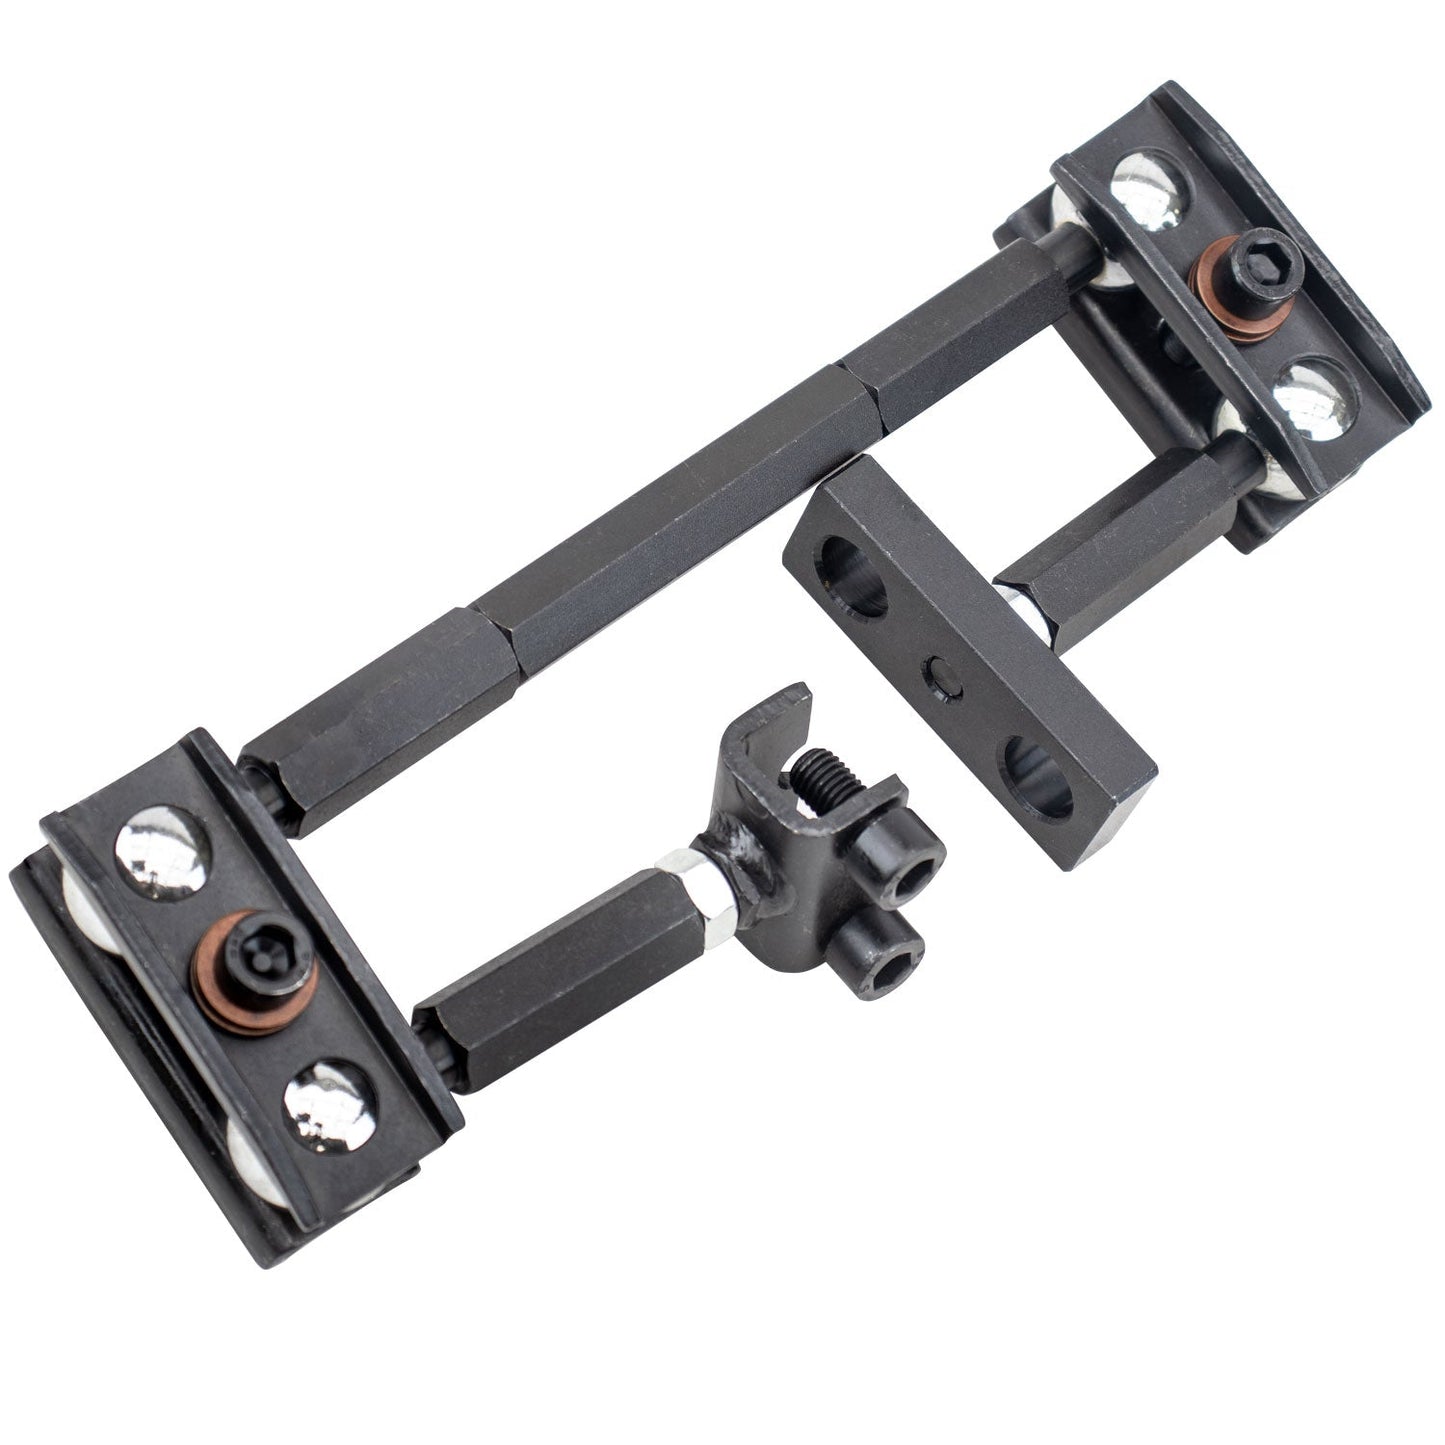 The Third Hand Modular Clamp, 2-Hole Clamping Base